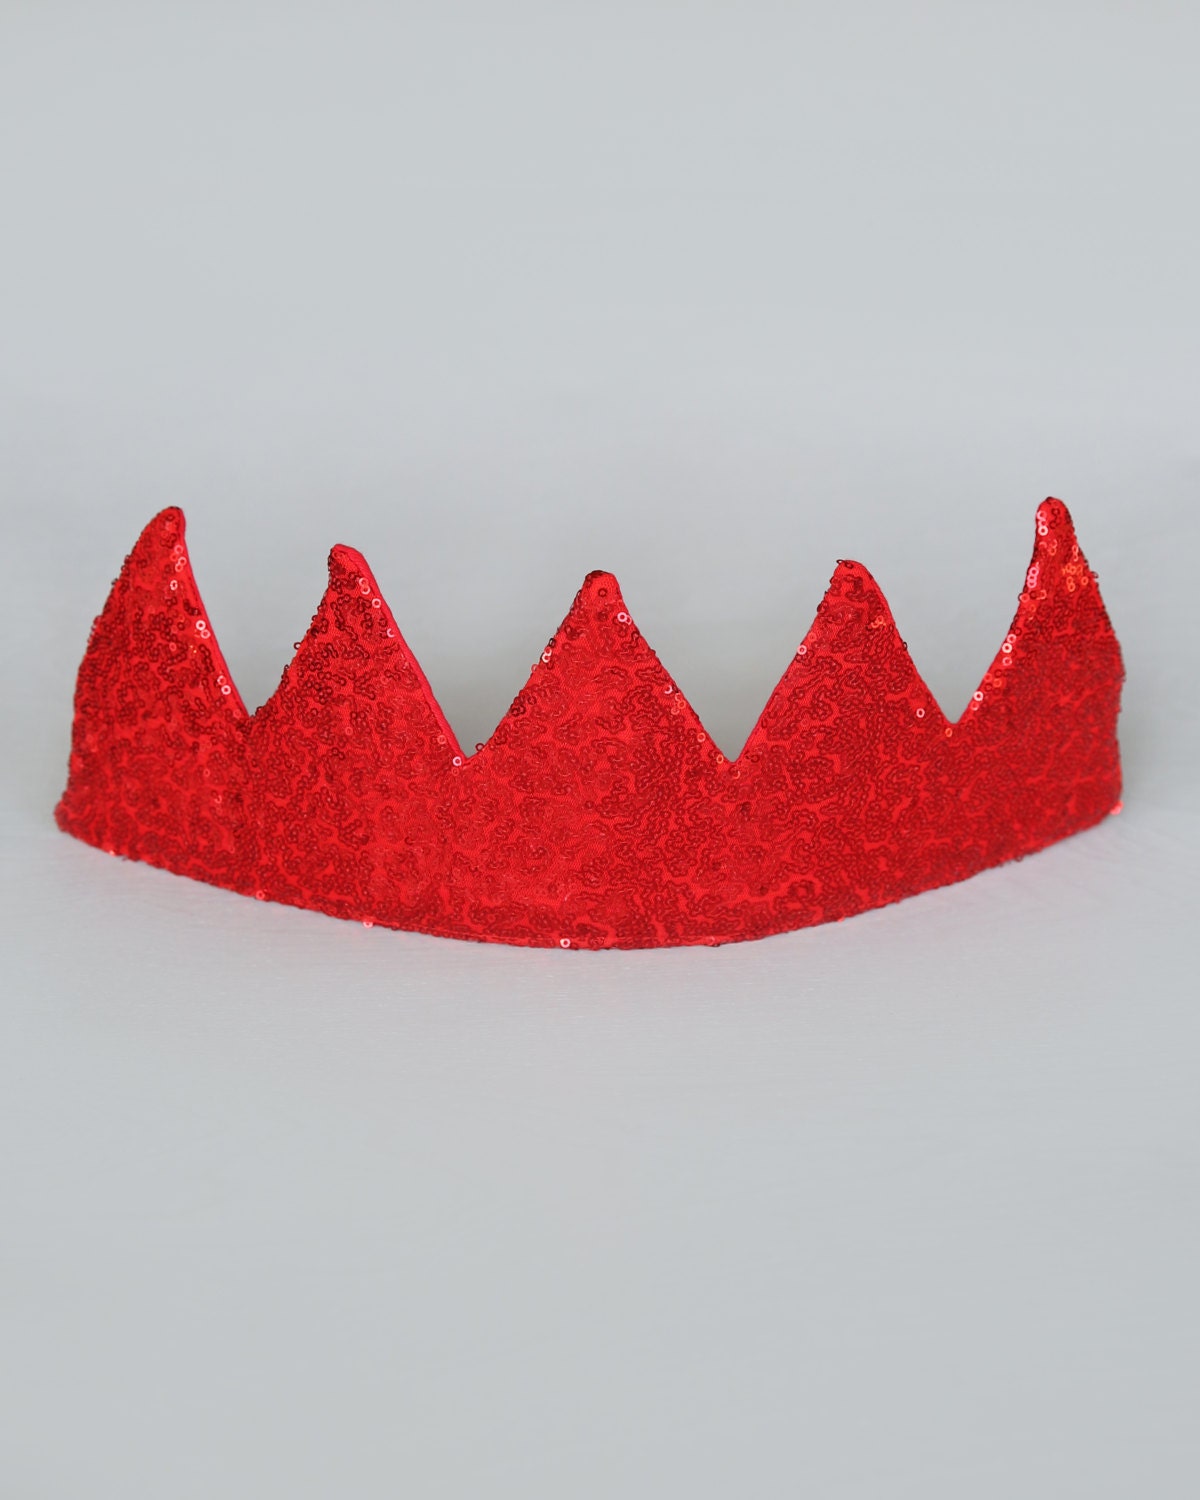 Dress Up Crown - Sequin Crown - Birthday Crown - Red Sequin Crown - Fits all